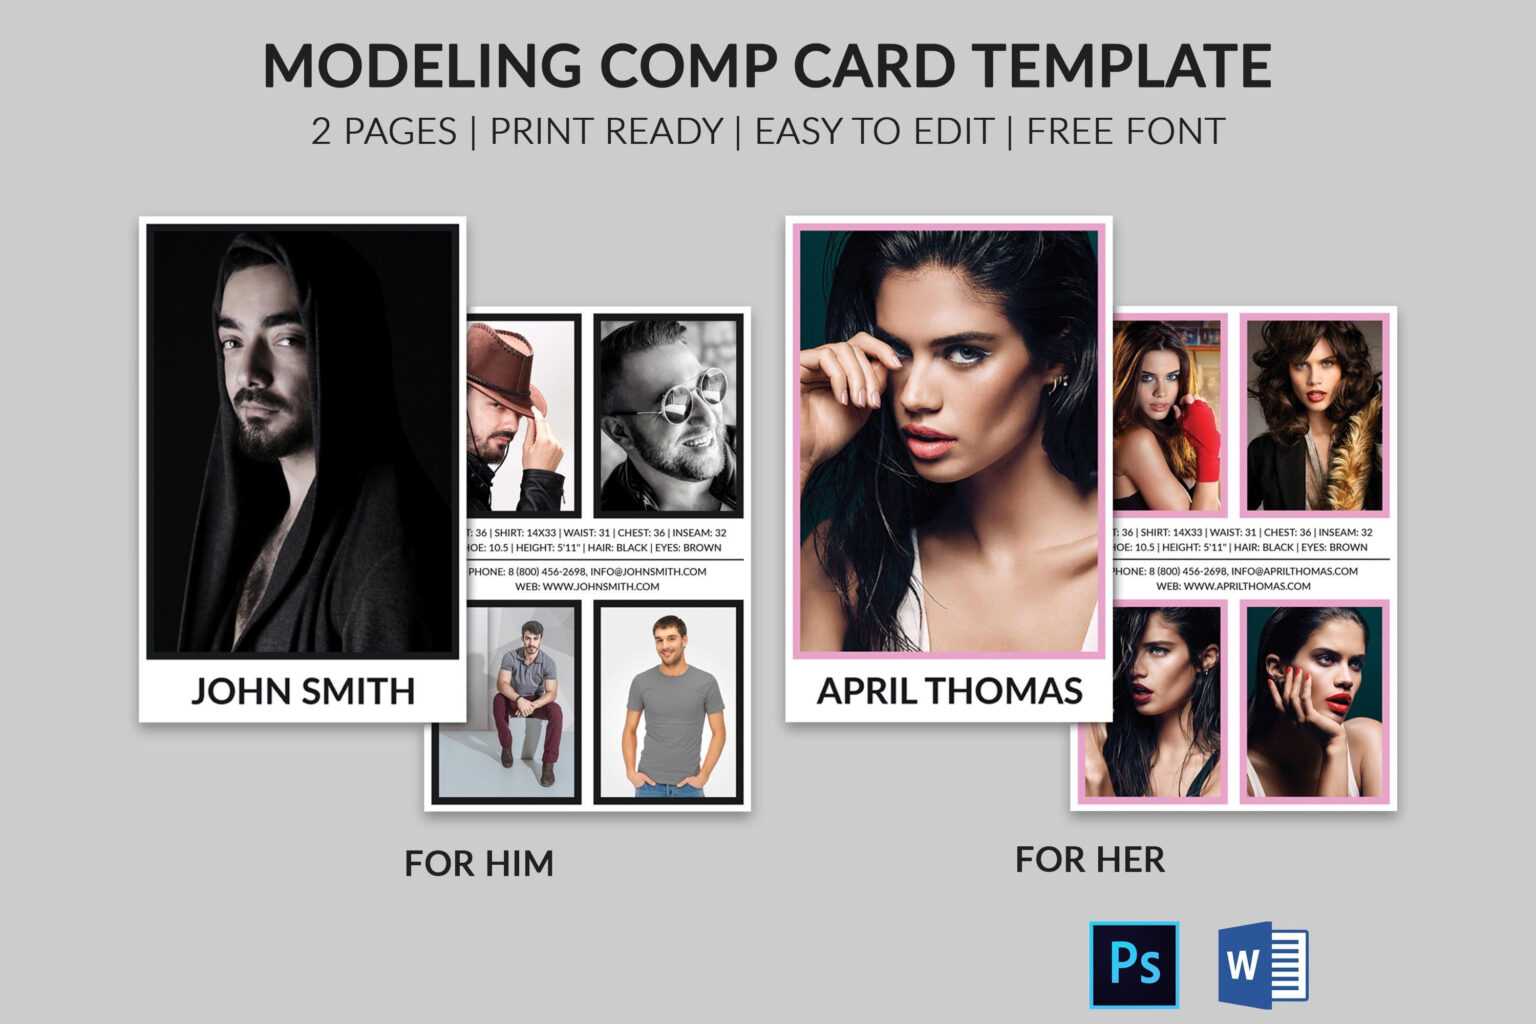 comp-card-template-colona-rsd7-with-free-model-comp-card-template-great-sample-templates